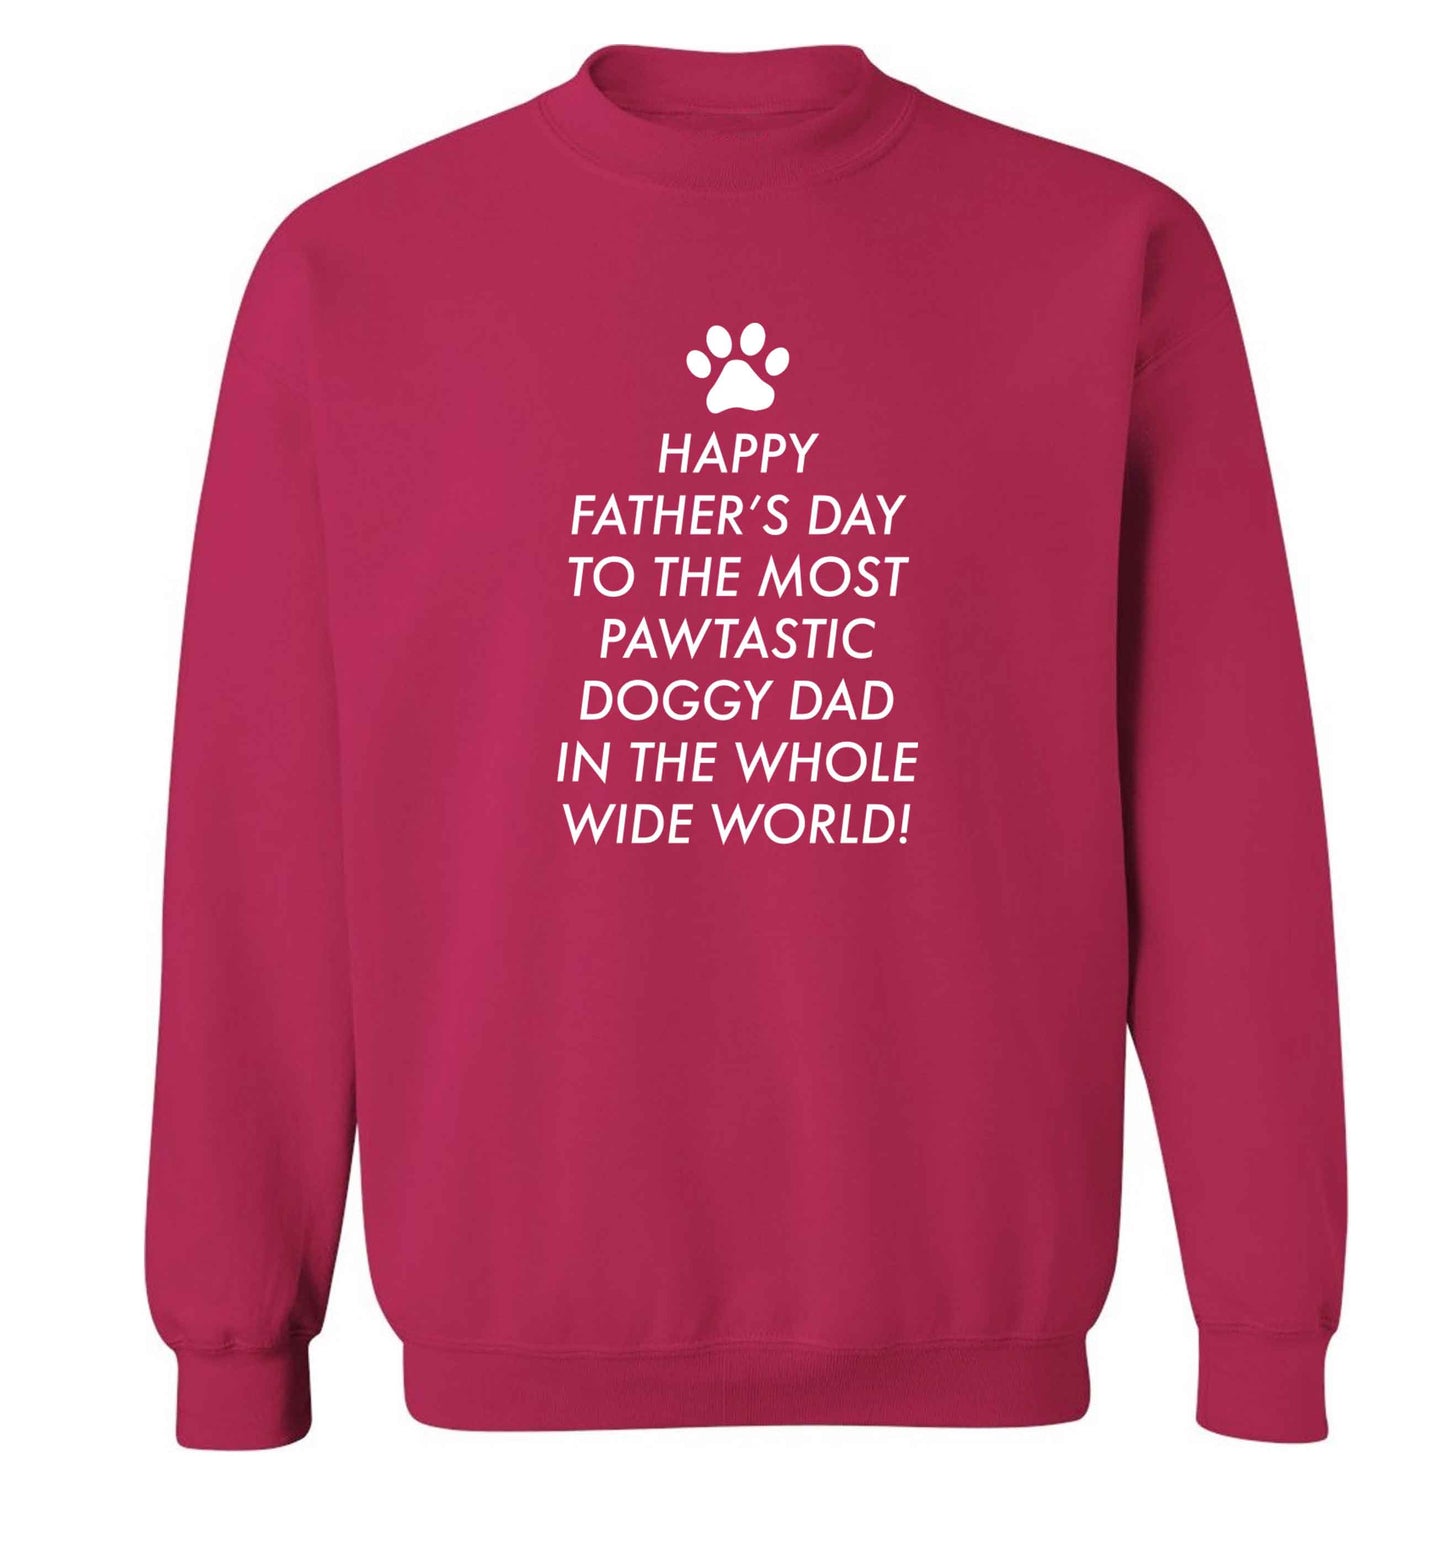 Happy Father's day to the most pawtastic doggy dad in the whole wide world!adult's unisex pink sweater 2XL